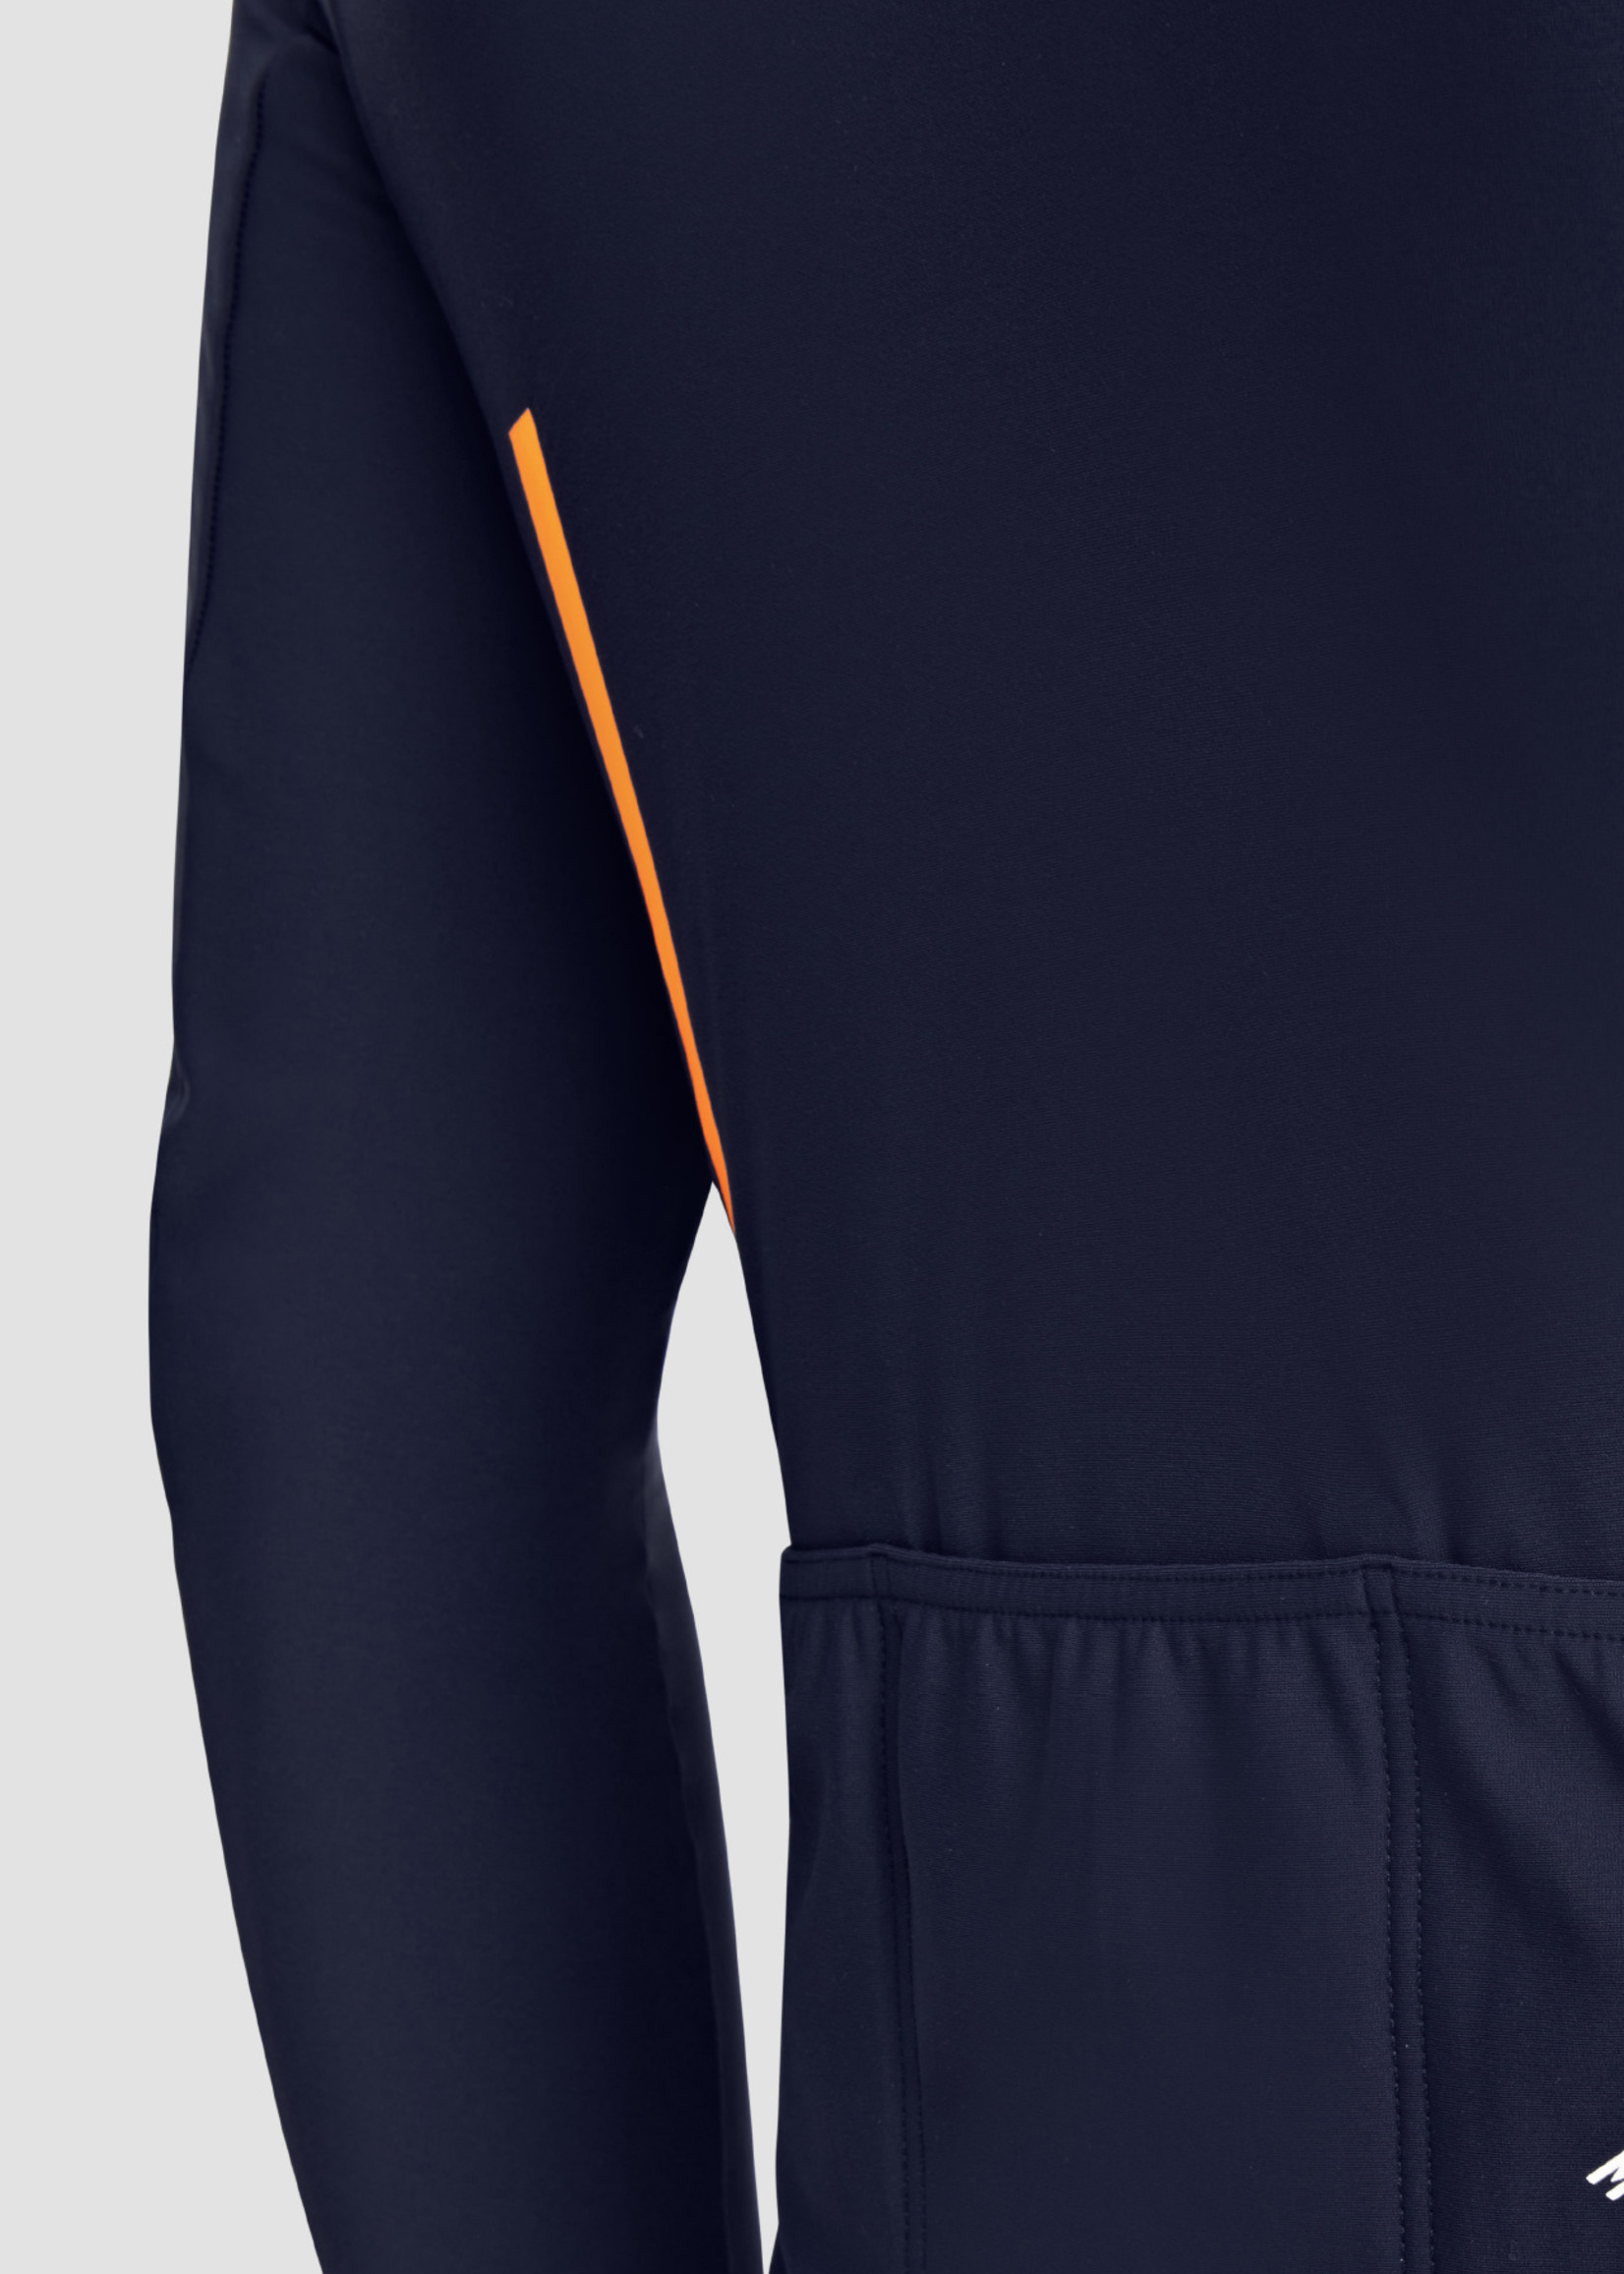 Maap Training Thermal LS Jersey - Navy